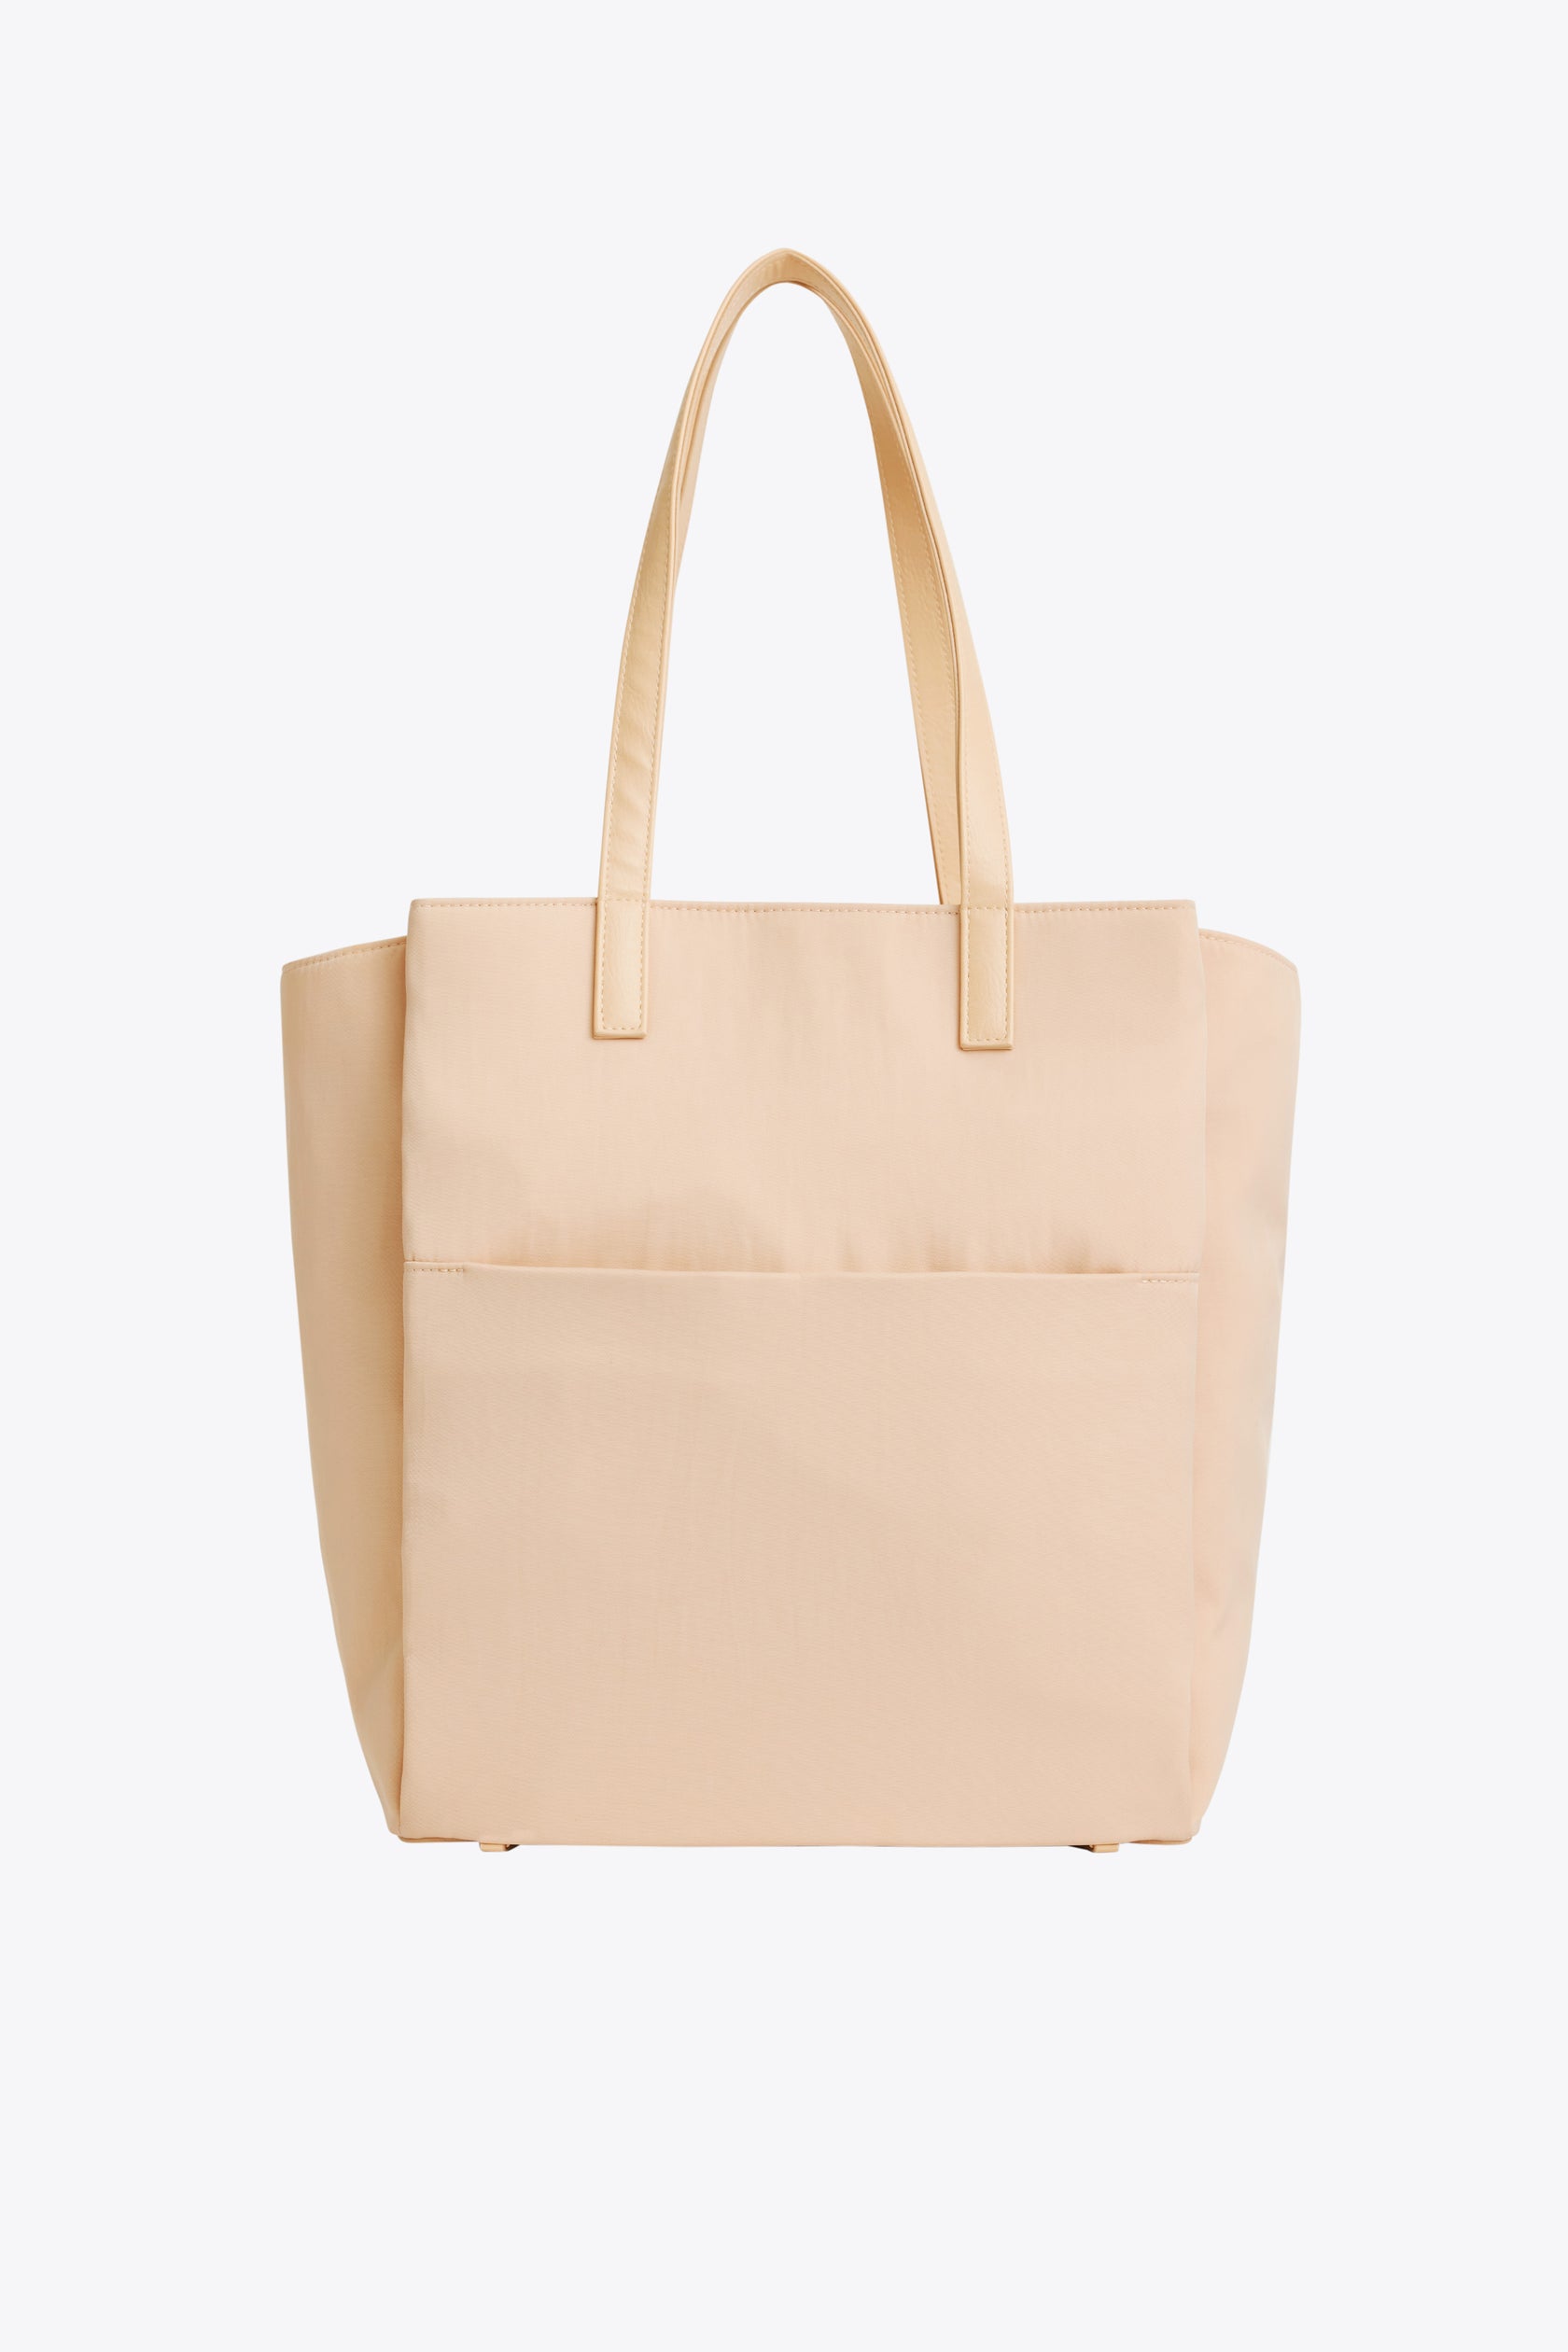 BÉIS 'The Commuter Tote' In Beige - Beige Commuter Tote For Work & Travel